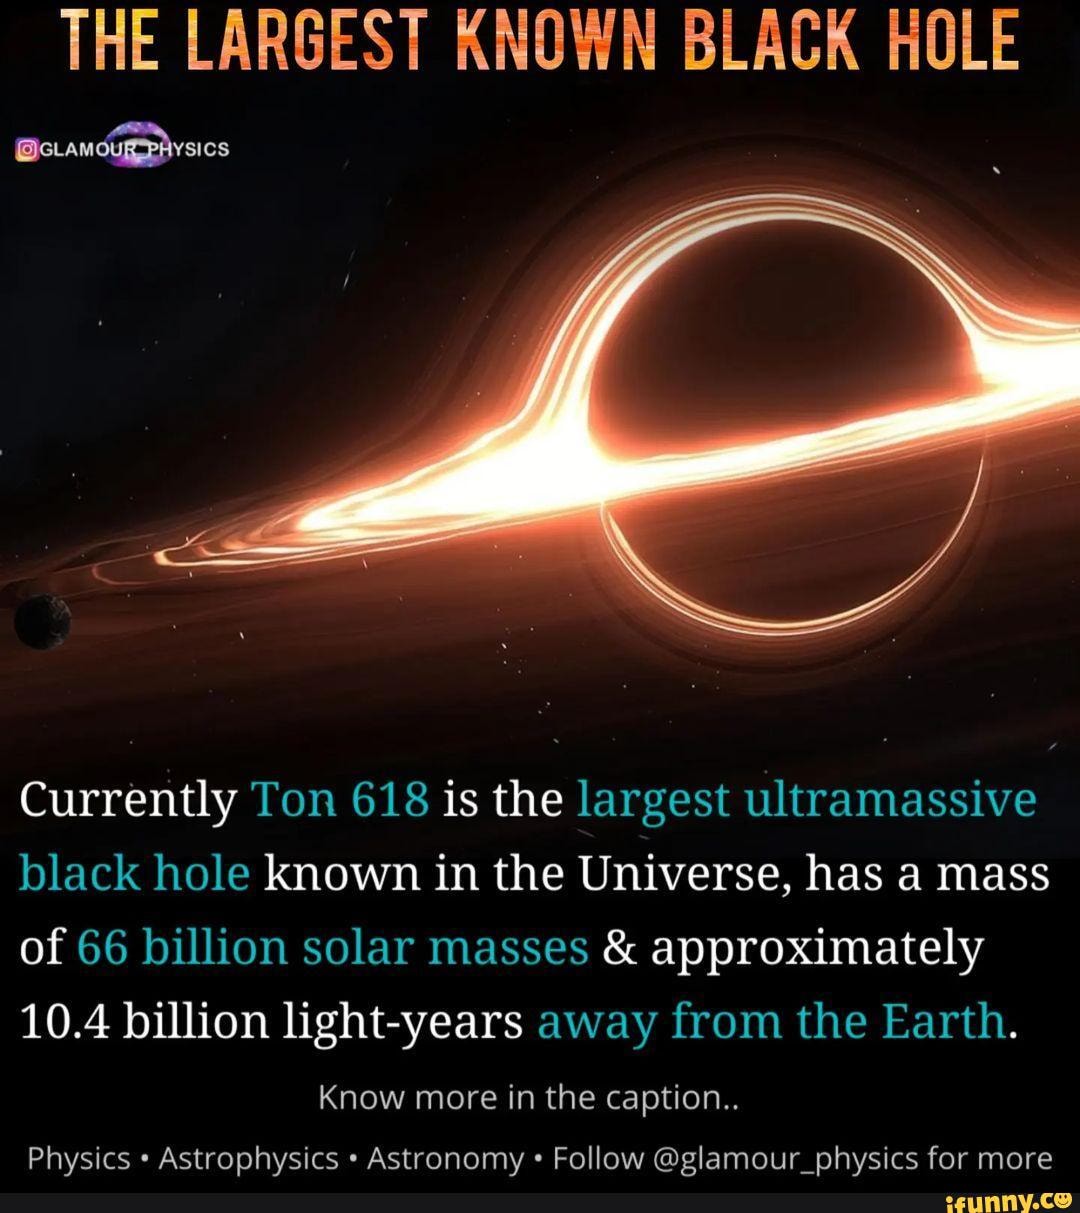 THE LARGEST KNOWN BLACK HOLE Currently Ton 618 the largest ultramassive black hole known in